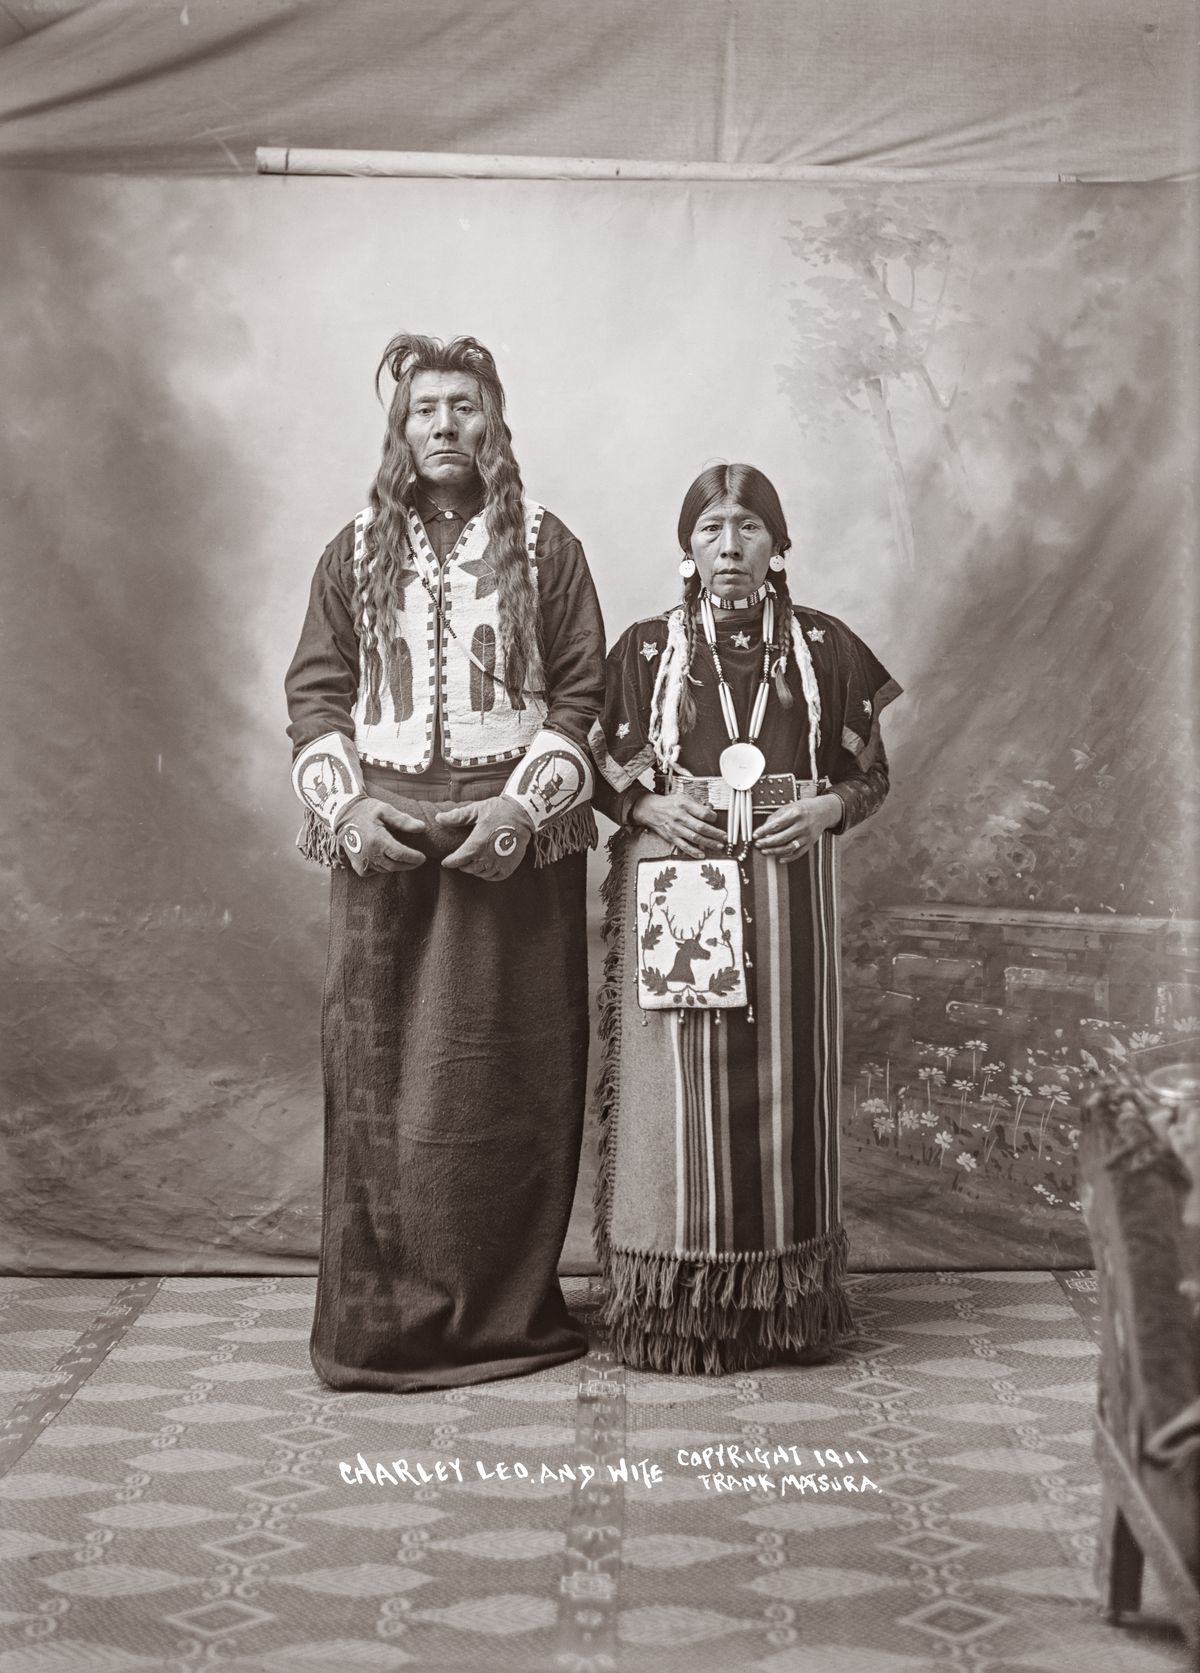 This 1911 photo, titled “Charley Leo and wife”, was shot by frontier photographer Frank Sakae Matsura, who worked in the Okanogan Valley from around 1903 until his death in 1913 from tuberculosis. It is part of a museum exhibit called “Frank S. Matsura: Portraits from the Borderland” opening at the Museum of Arts and Culture in Spokane April 29.  (Frank Sakae Matsura photo scanned by Dean Davis)